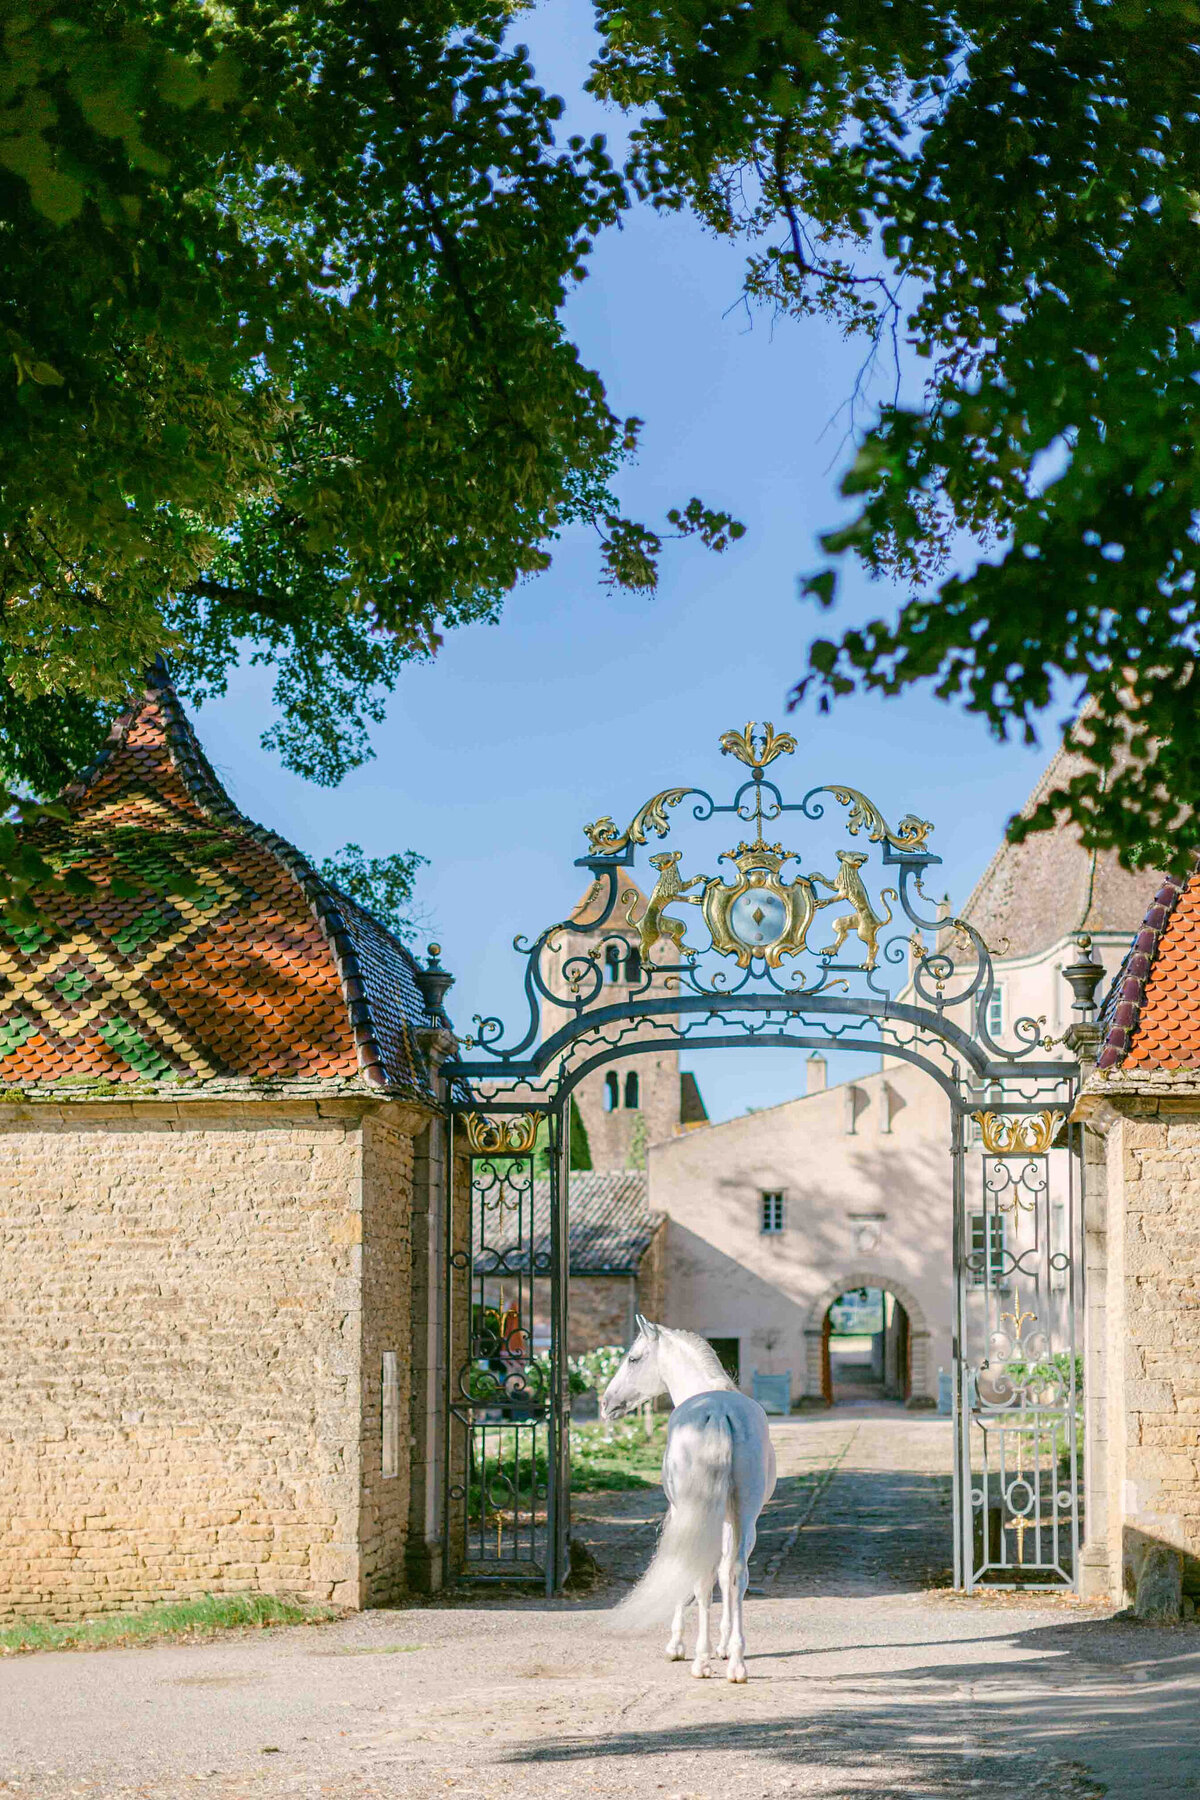 Château wedding surrounded by the fine vineyards of Burgundy